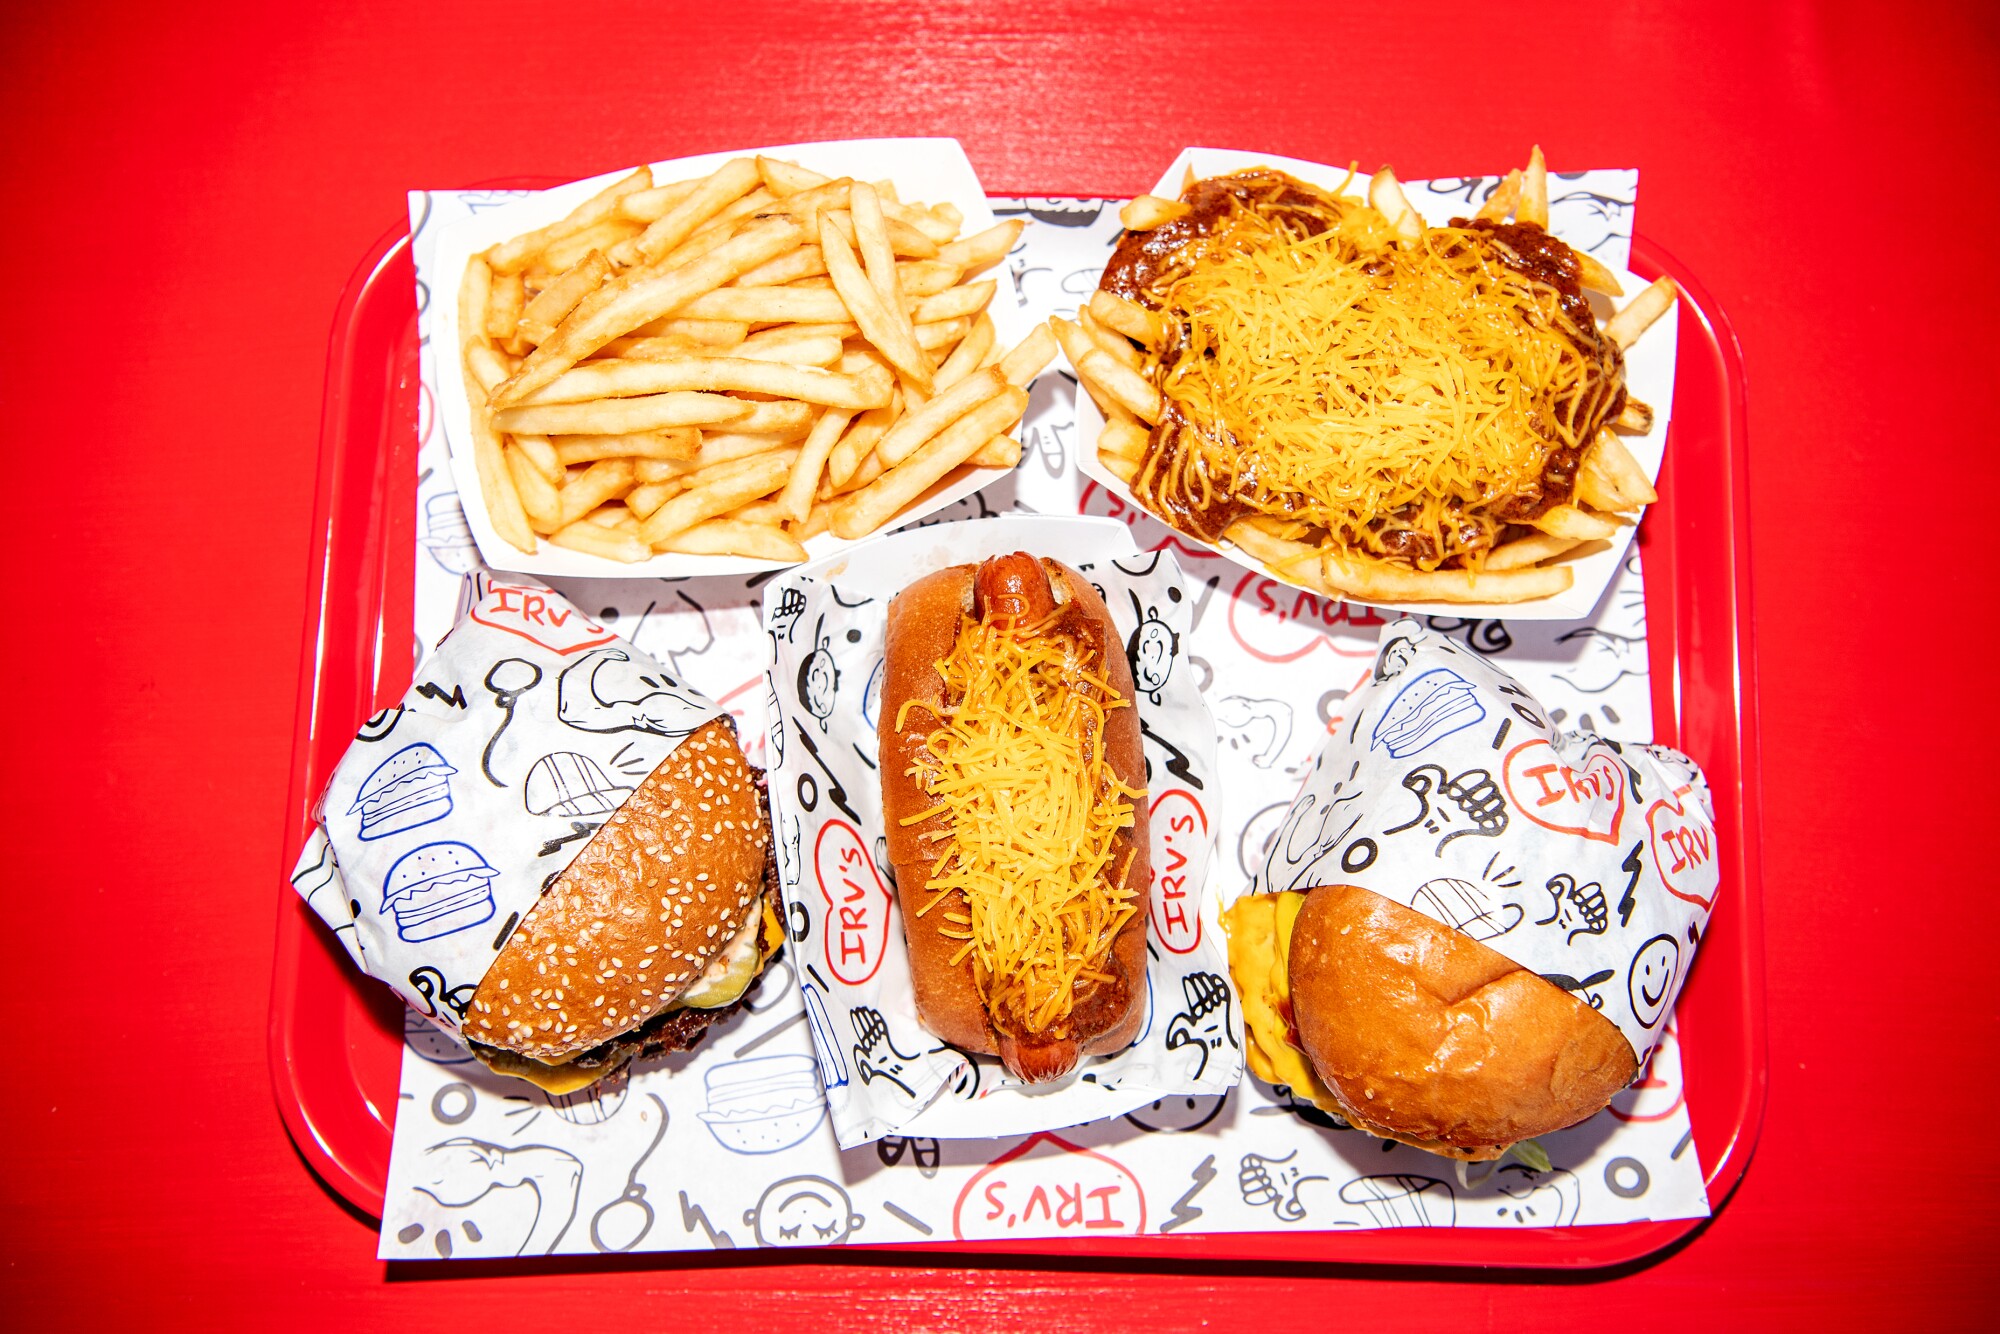 A spread from Irv's Burgers: regular and chili cheese fries, Irv's double, Irv's chili dog and the Just for You burger.